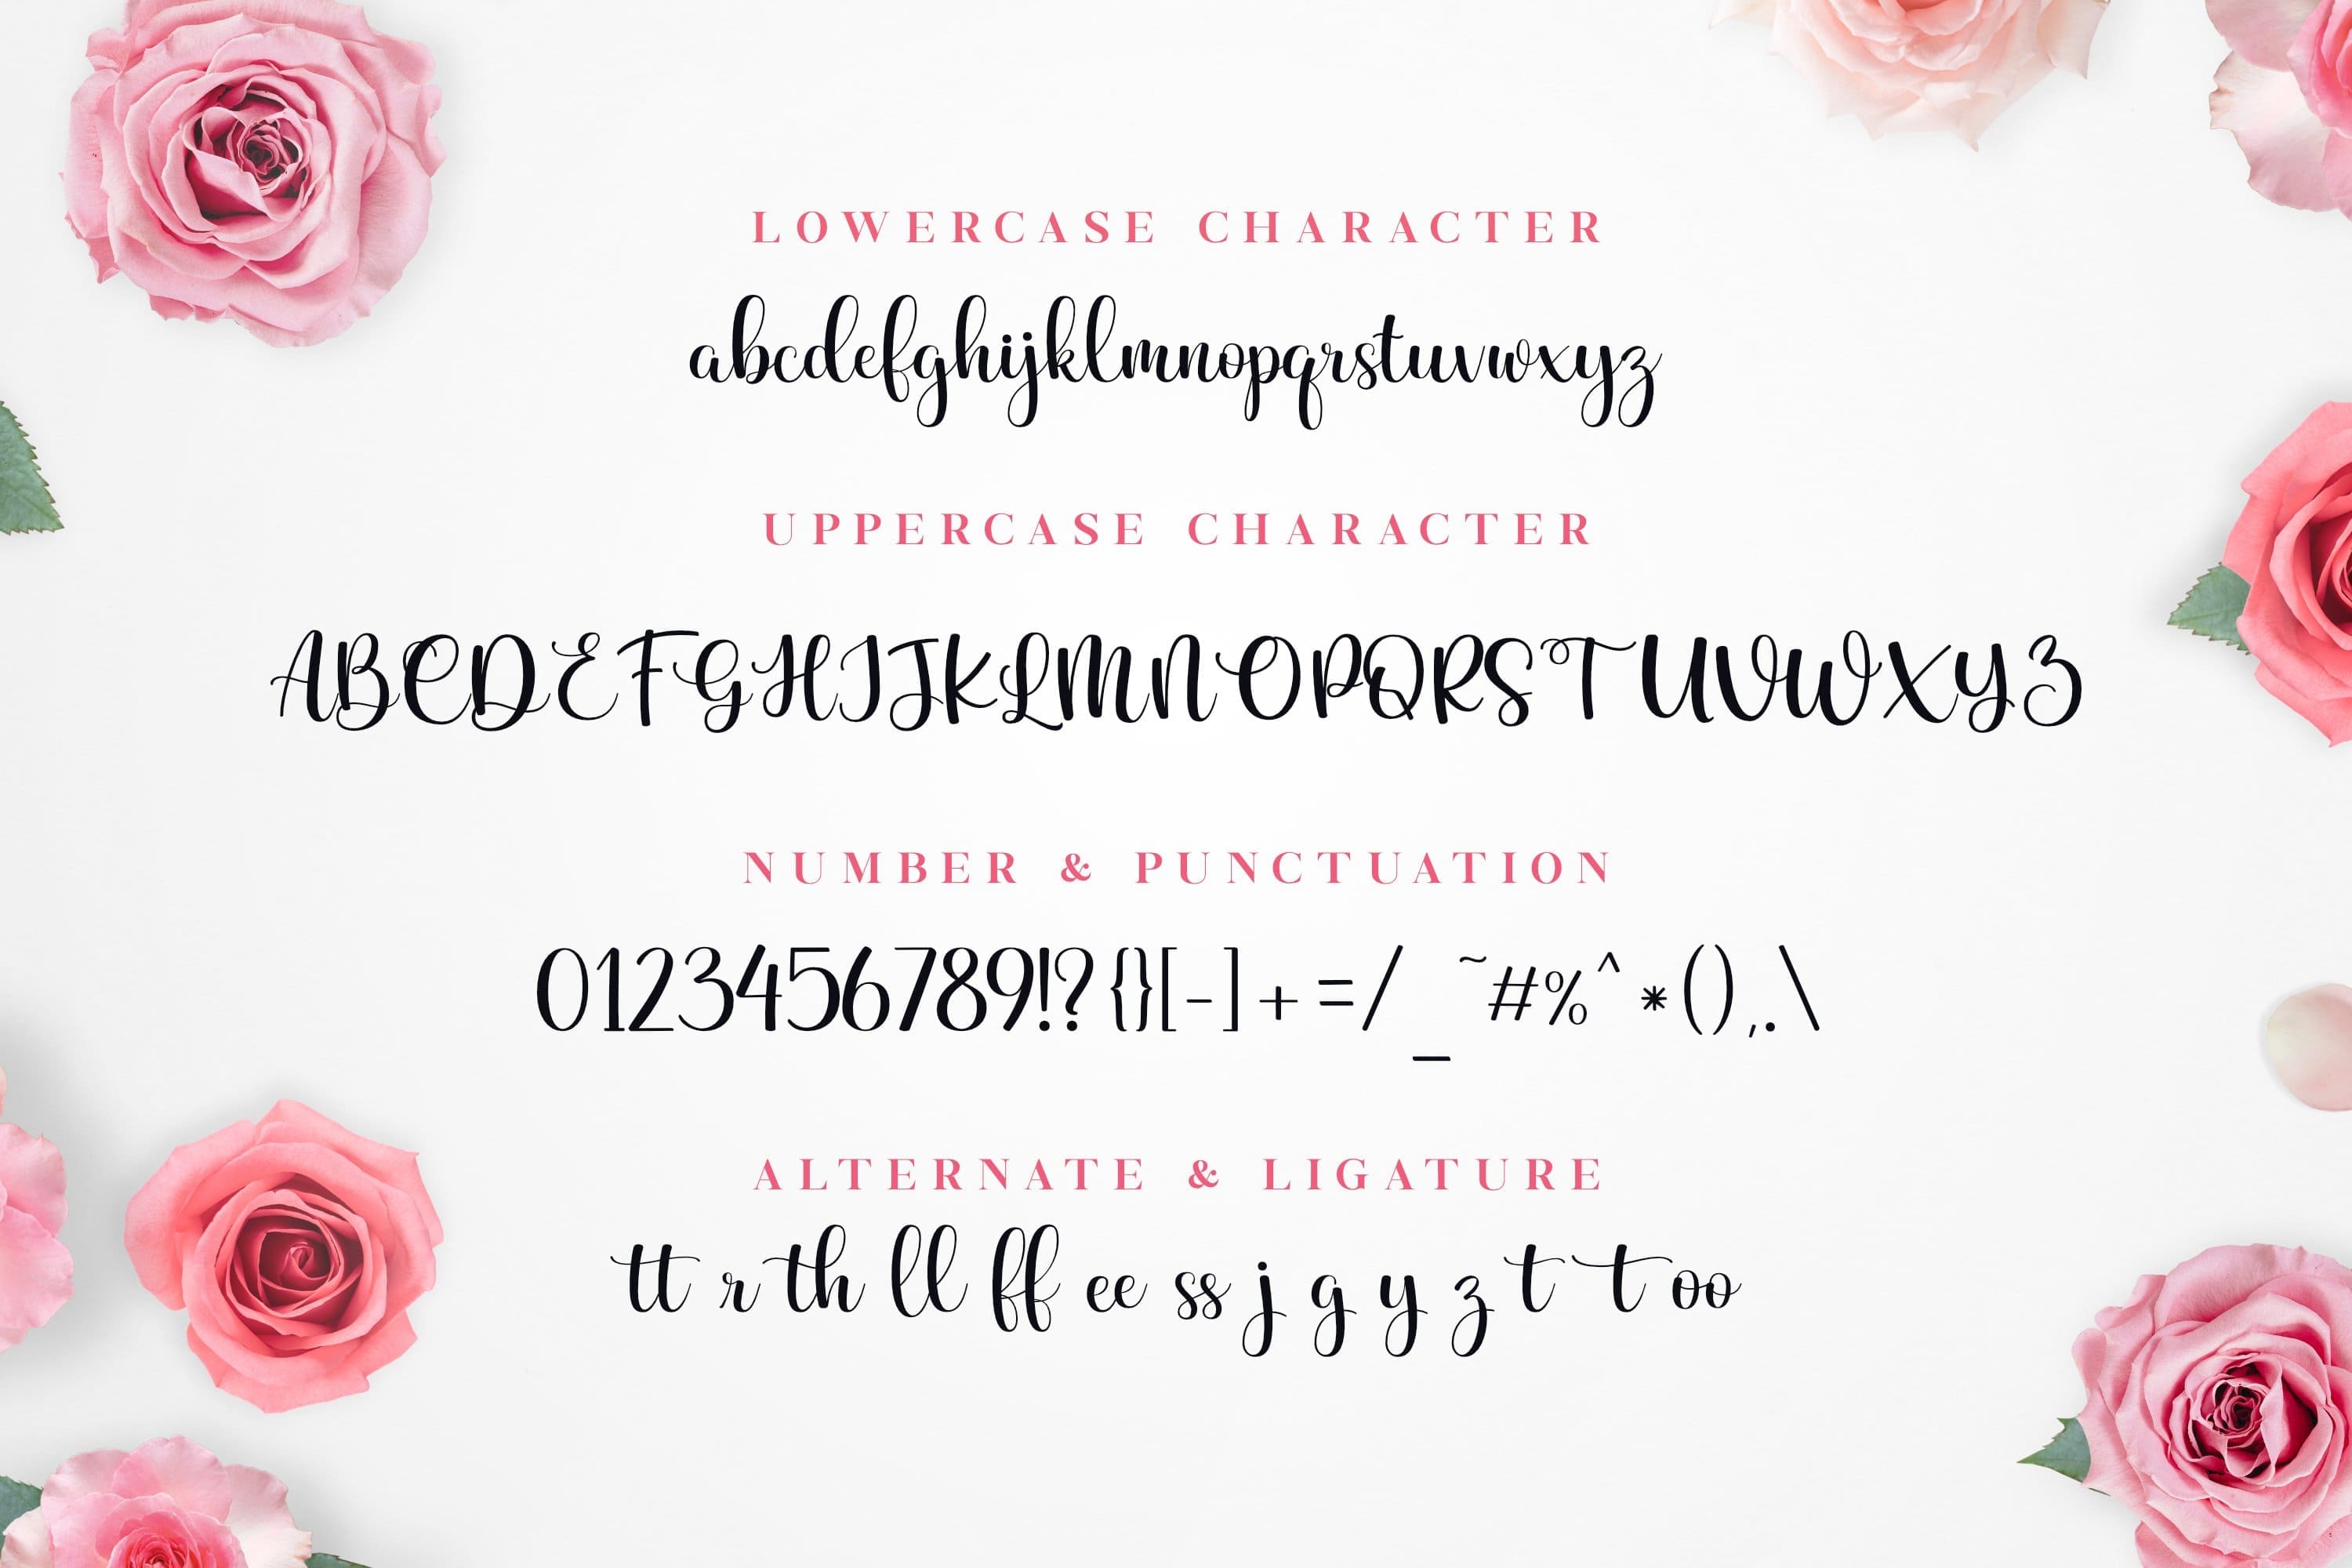 Beauty and elegance, alphabet with Lowercase character, Uppercase character, Number & Punctuation.